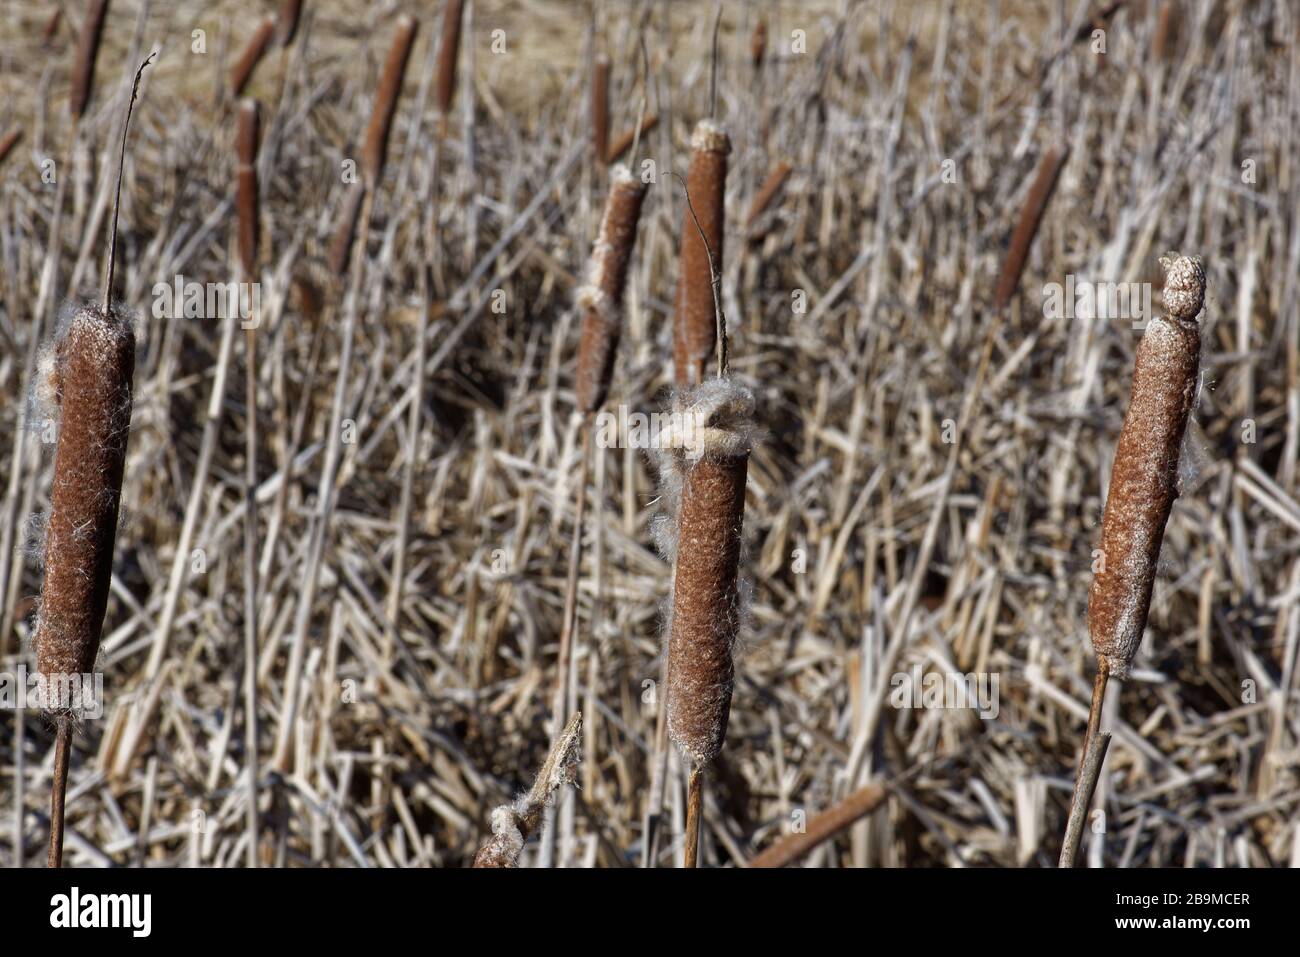 Typha latifolia is a genus of about 30 species of monocotyledonous flowering plants in the family Typhaceae. Stock Photo